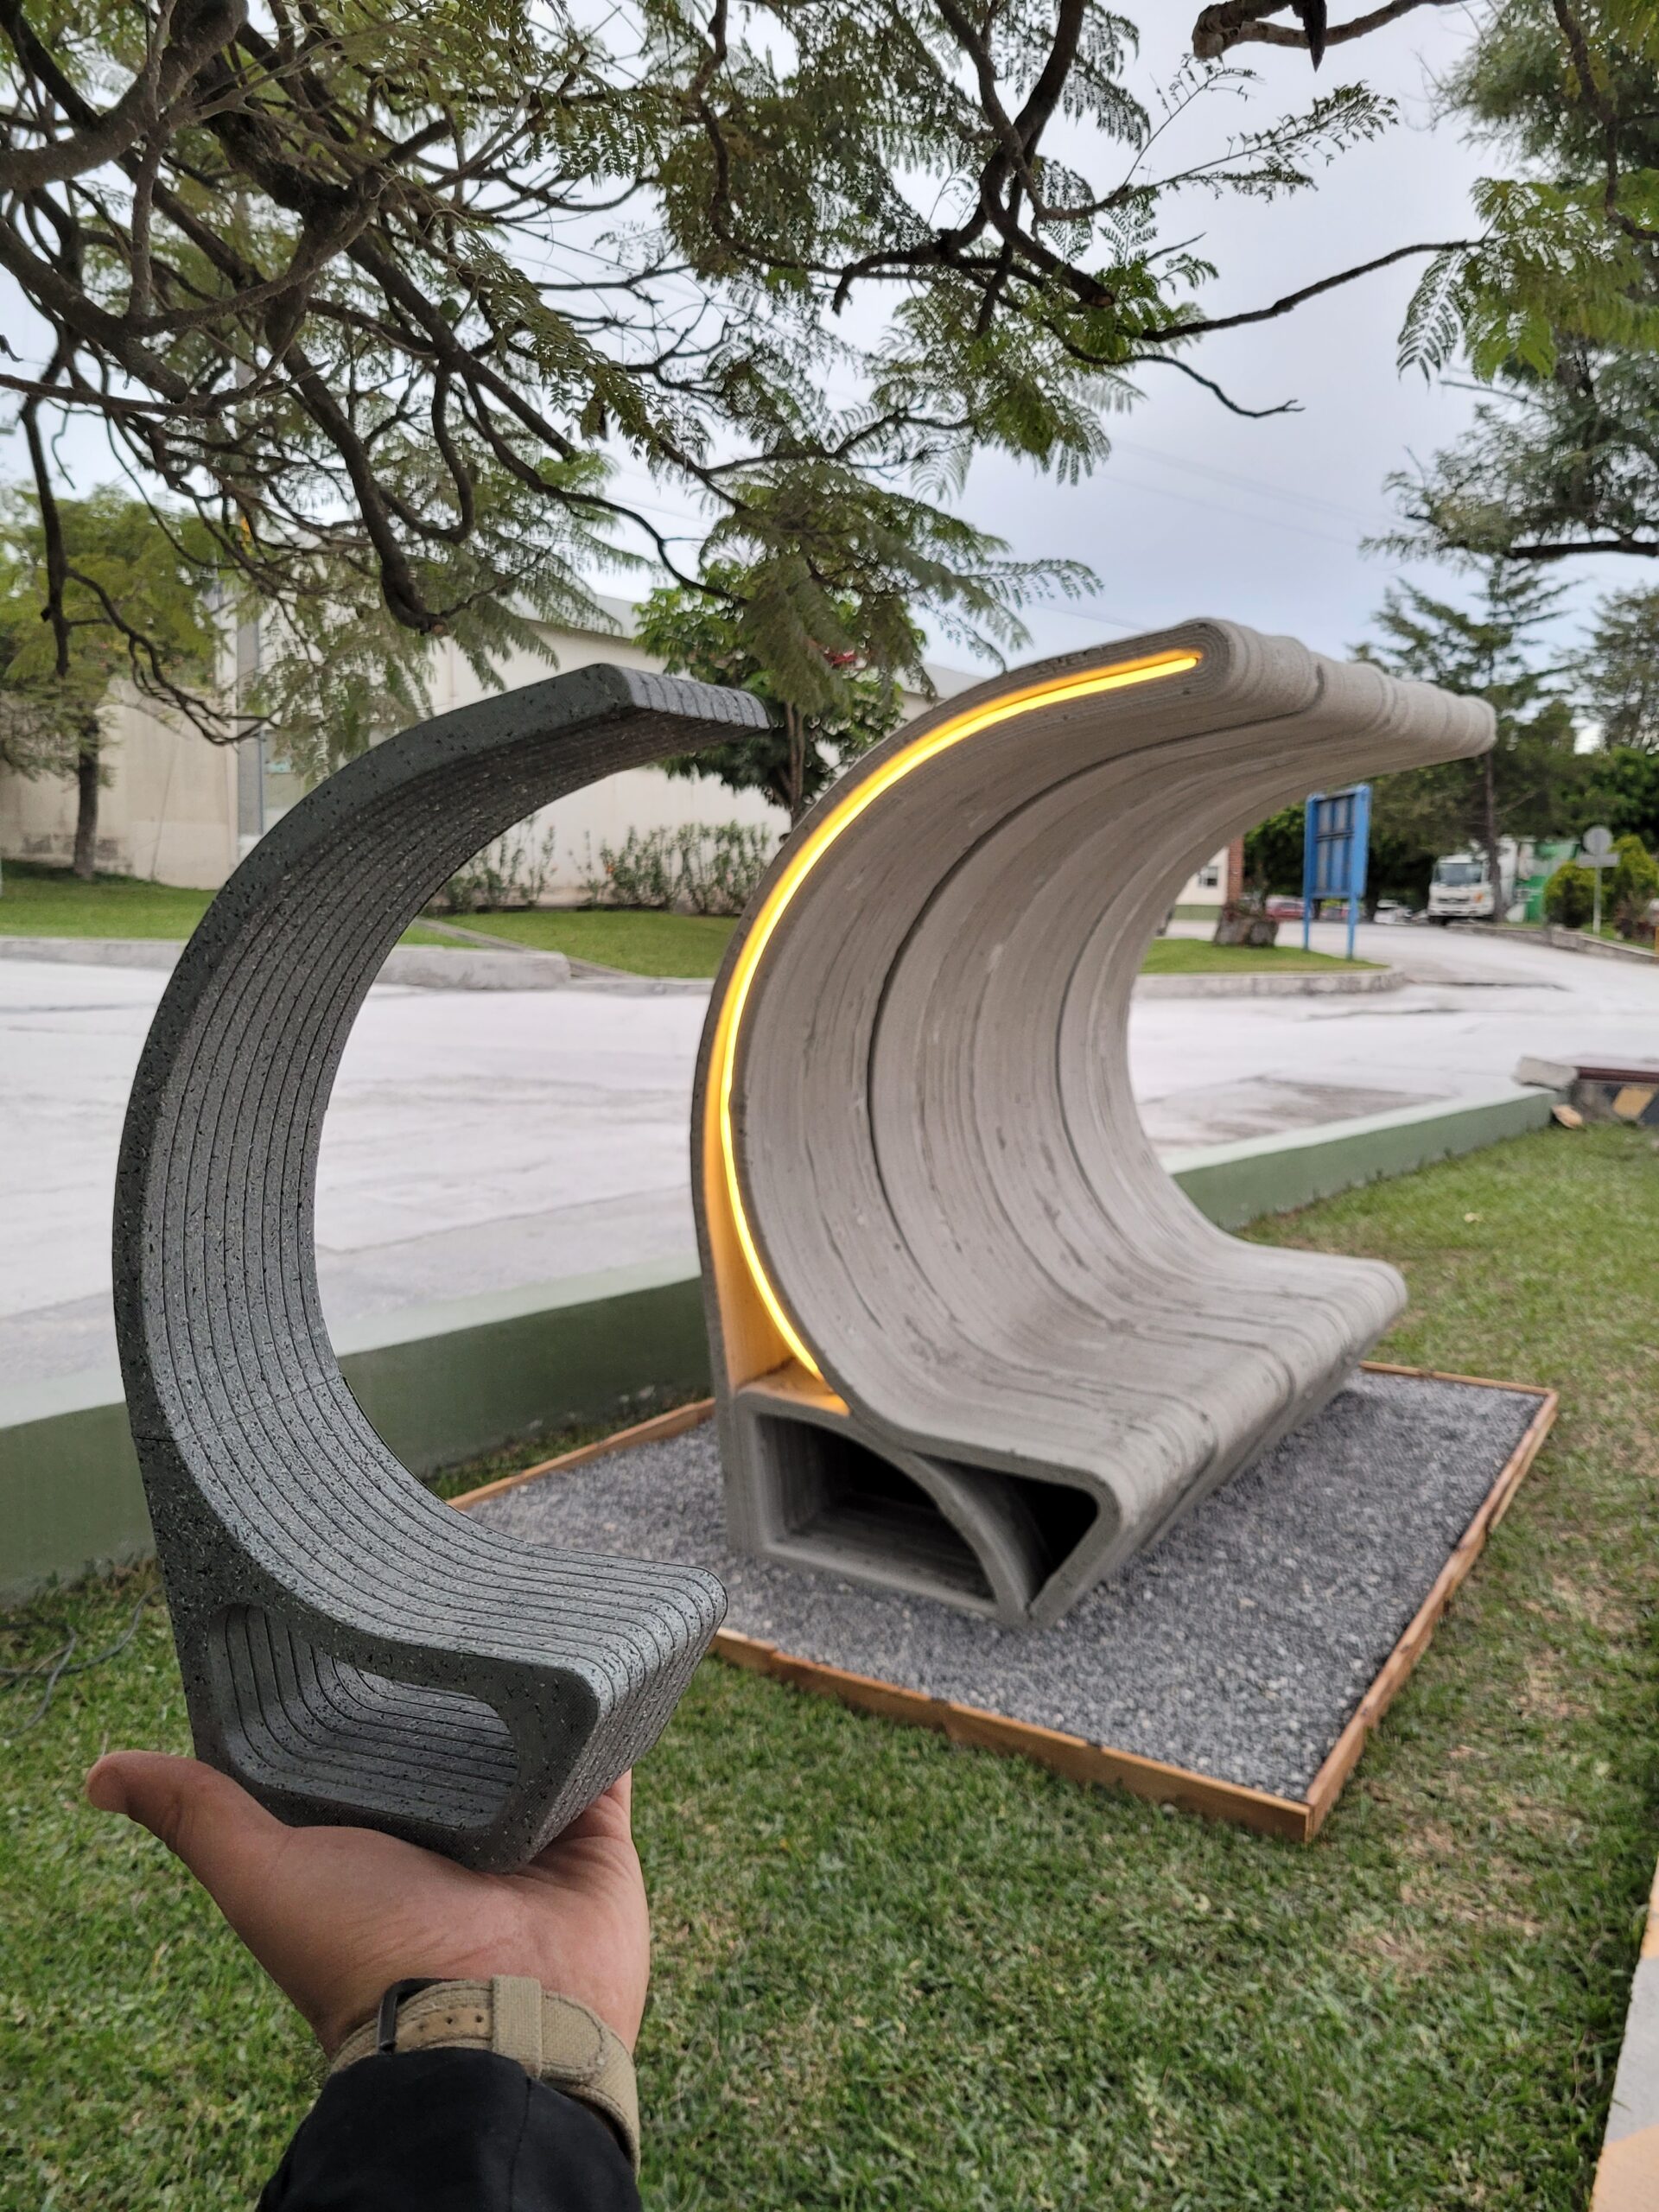 3D printed projects of Cementos Progreso using a COBOD printer